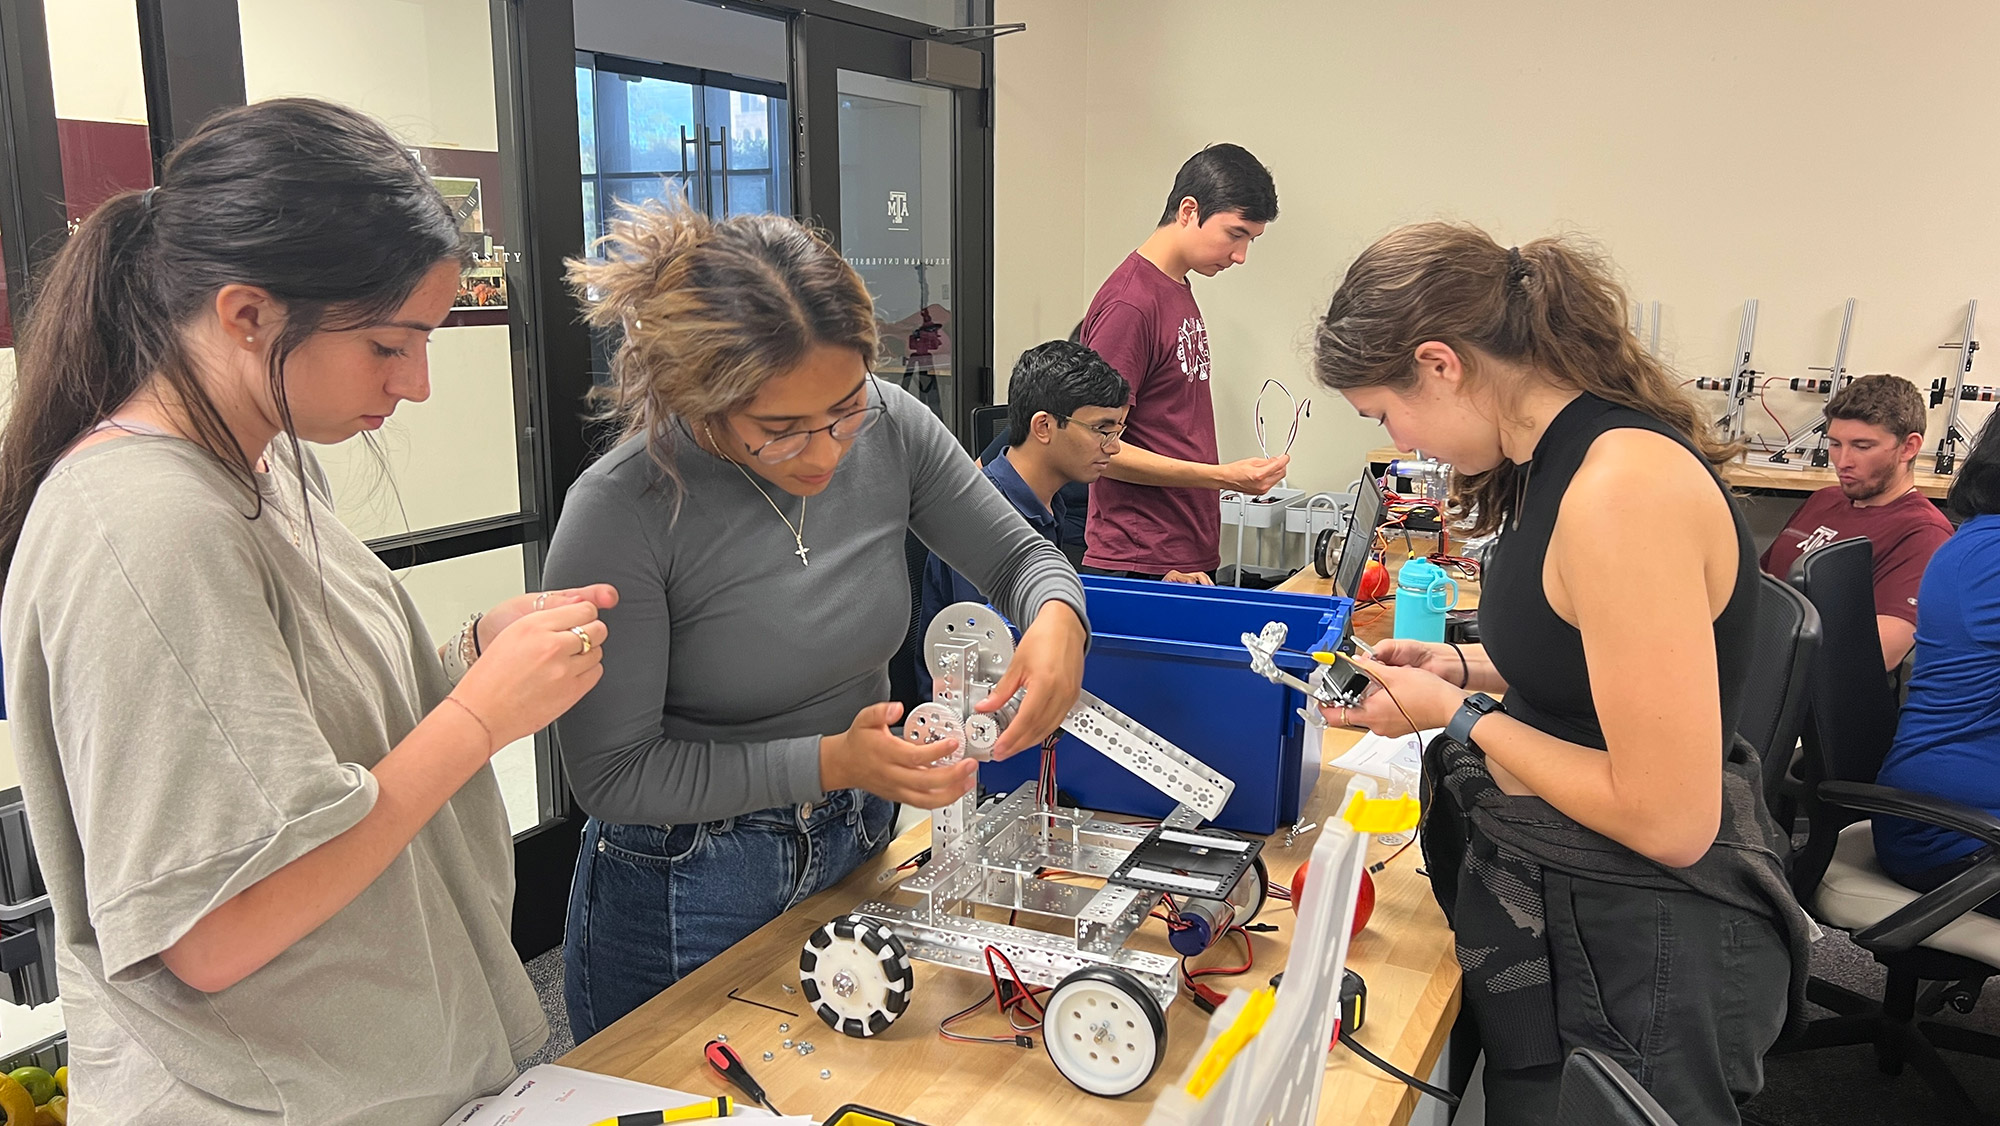 Seven students working on a robotics project.